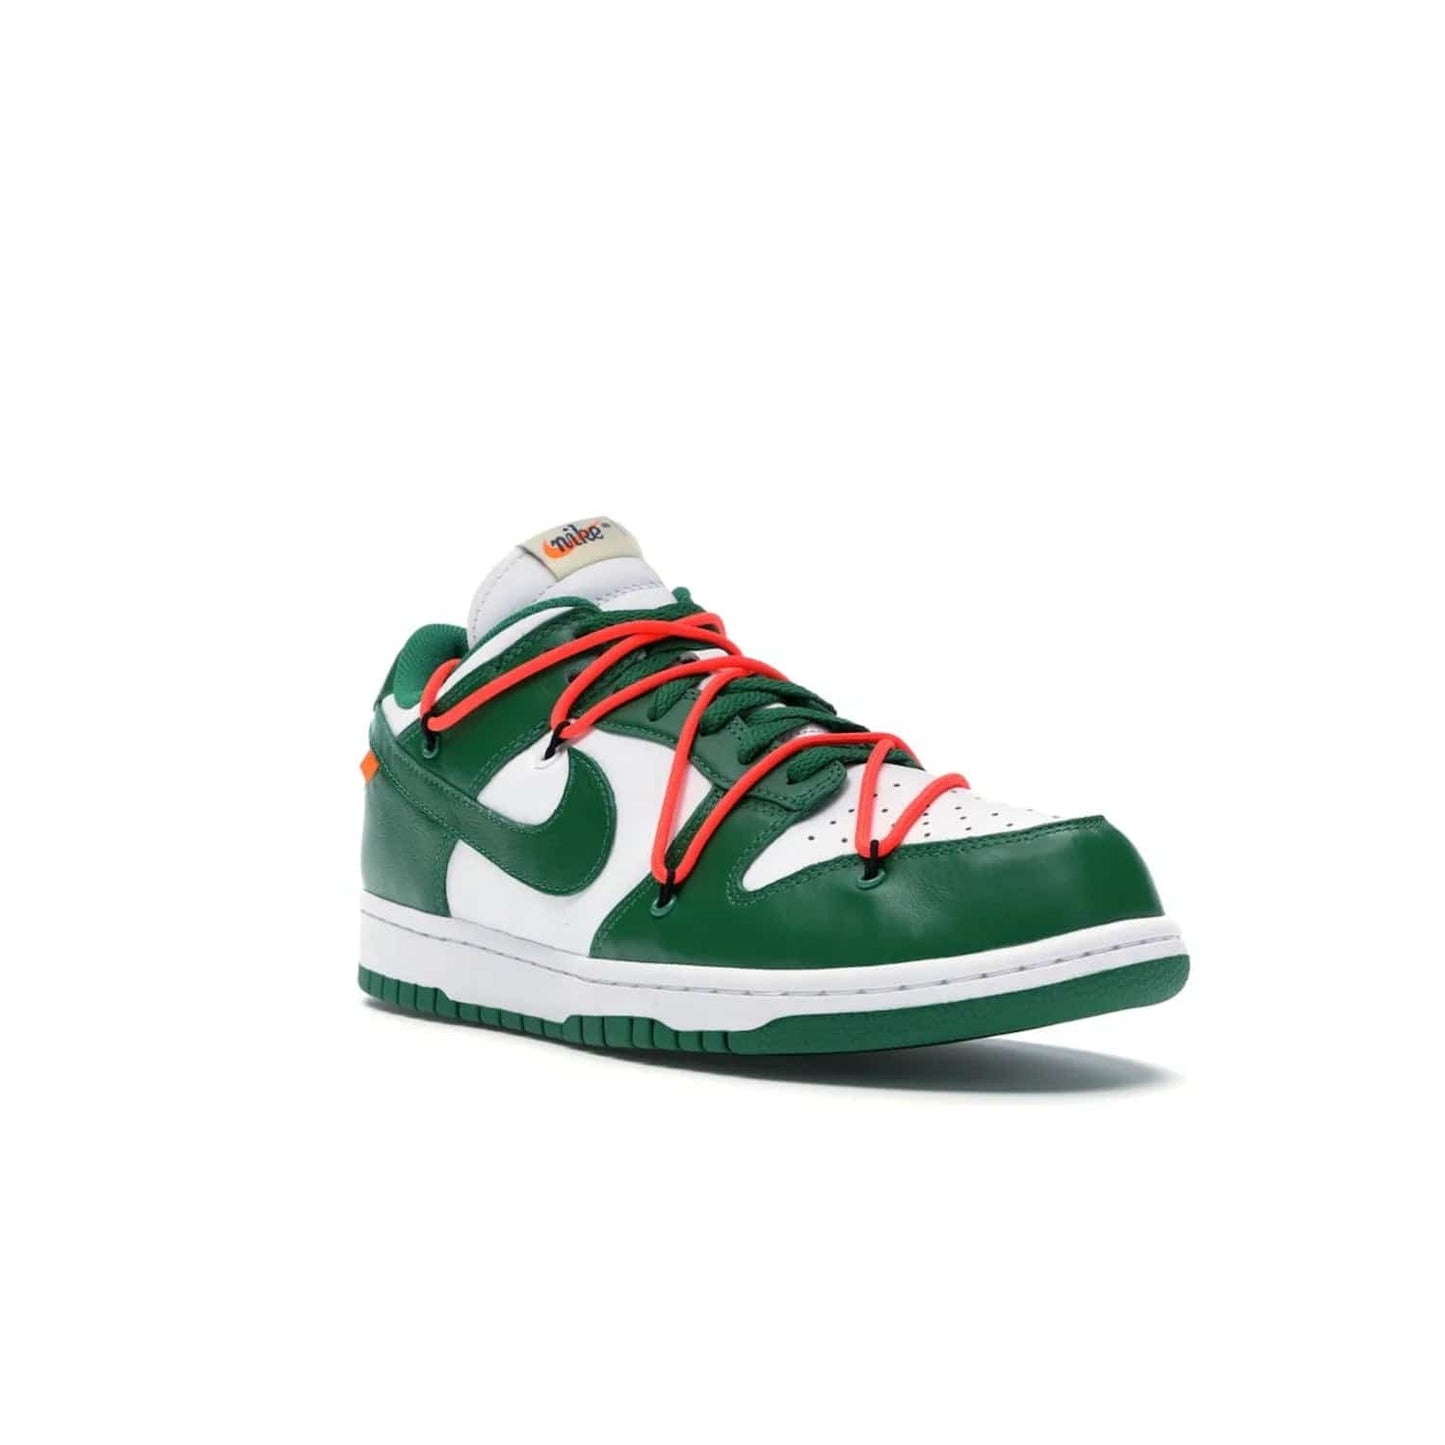 Nike Dunk Low Off-White Pine Green - Image 6 - Only at www.BallersClubKickz.com - The Nike Dunk Low Off-White Pine Green combines classic 1980s style with modern-day design. Featuring white leather uppers and pine green overlays, these classic kicks feature secondary lacing system, zip-ties and signature Off-White text. Releasing in December 2019, these shoes are a timeless classic for any wardrobe.